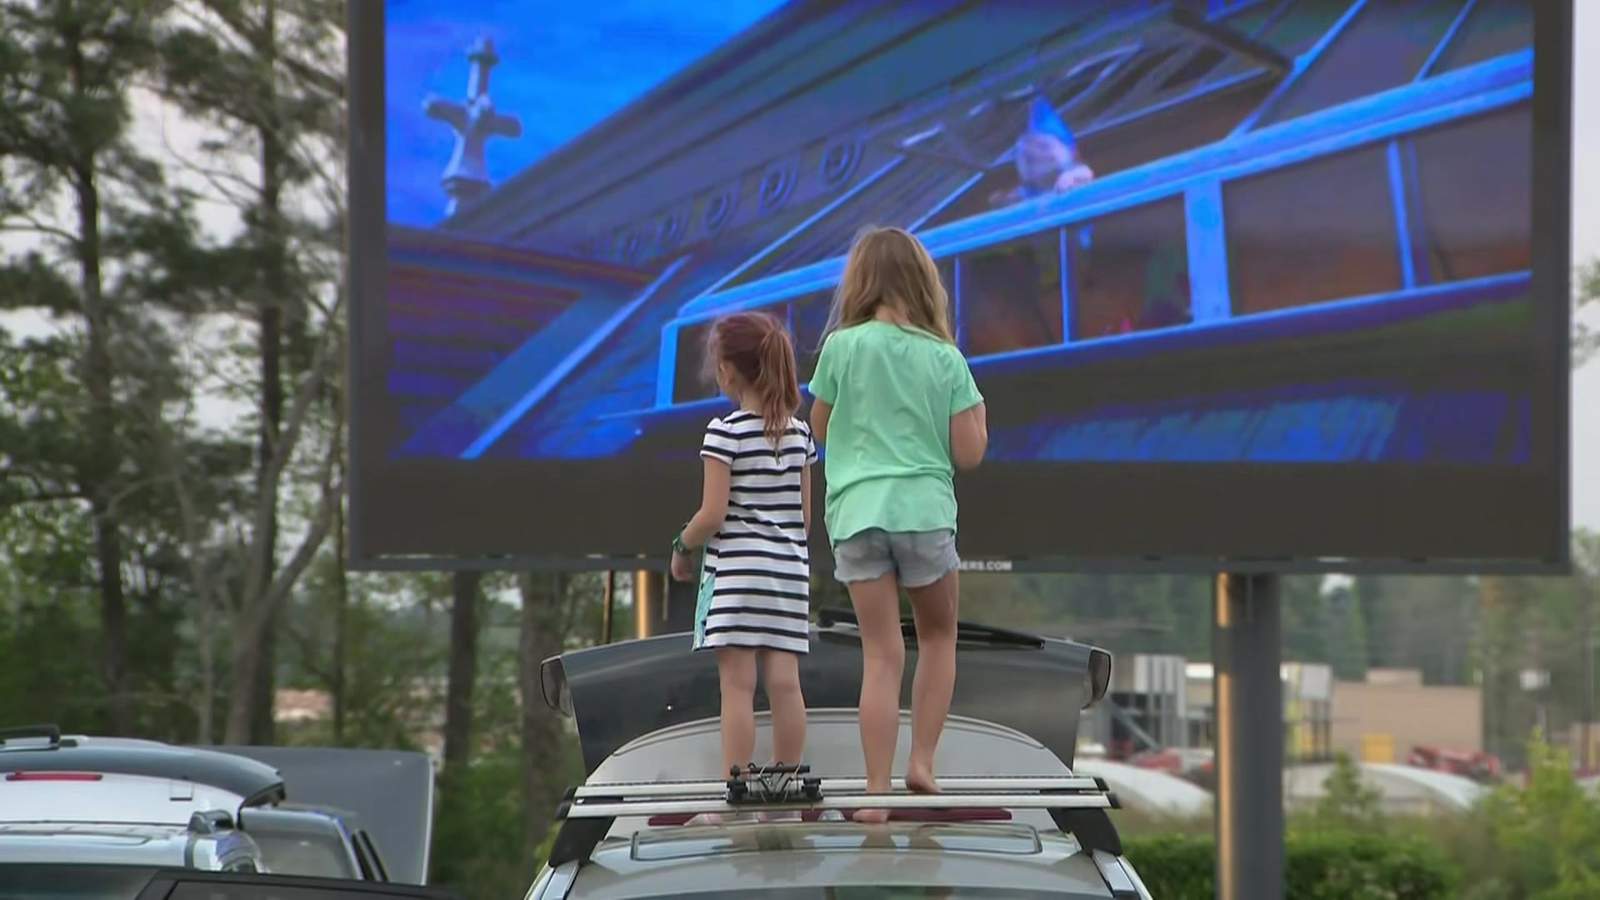 Pop-up drive-in theater a lifeline for families, restaurant in Spring